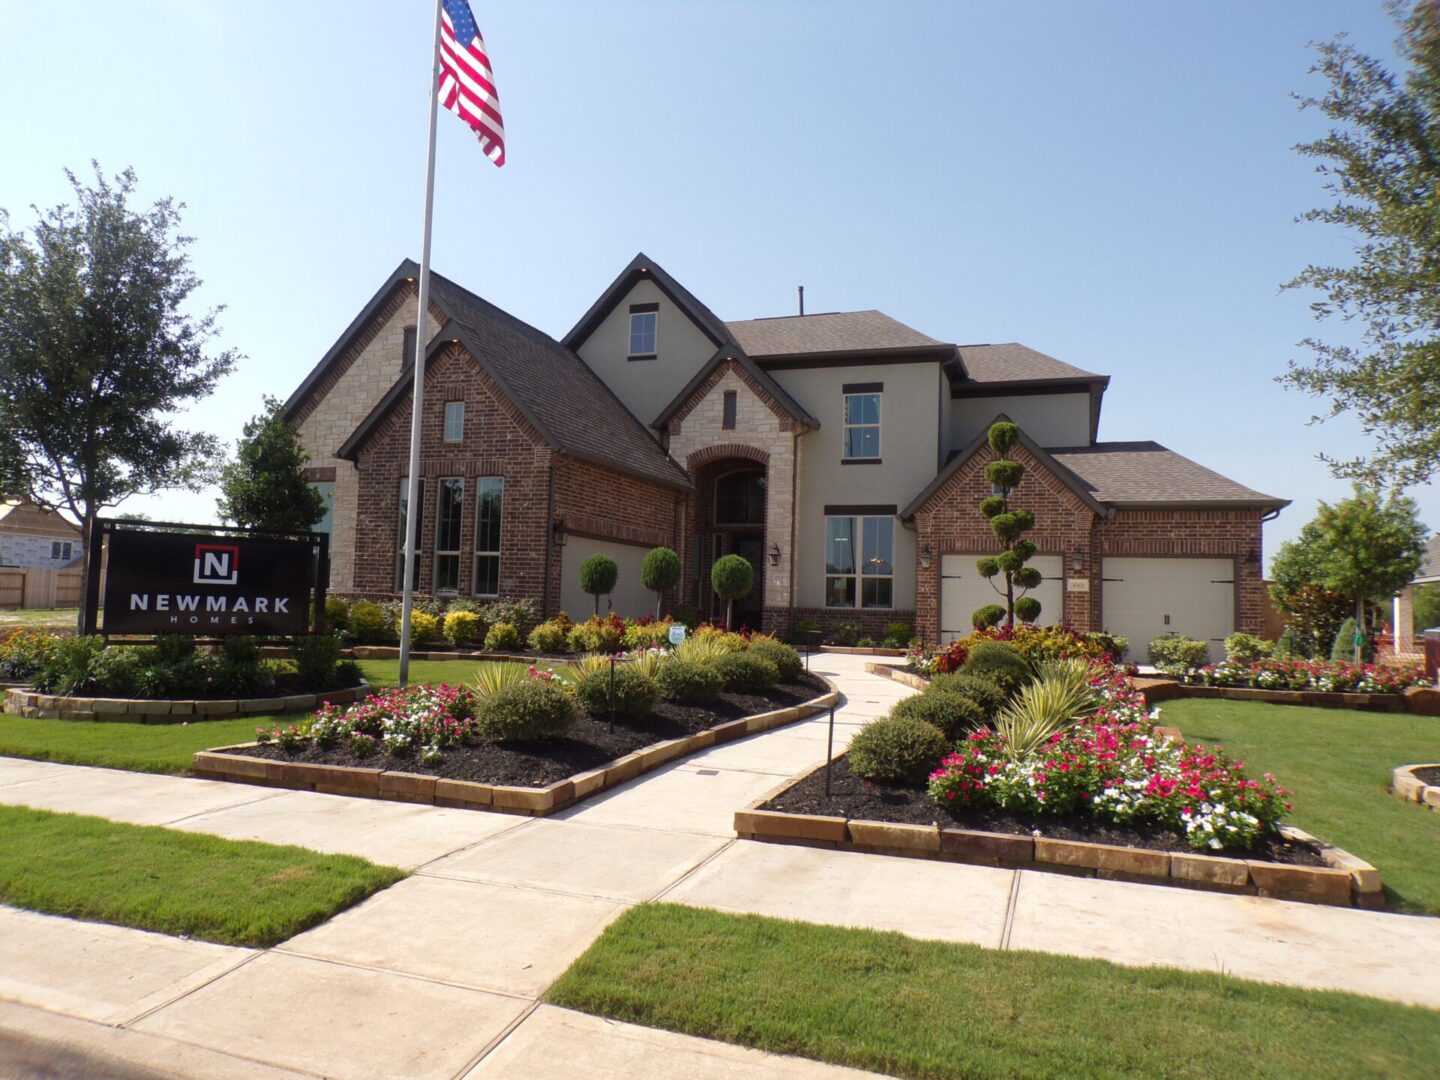 A large two-story brick house with a landscaped front yard and an American flag, under a clear sky, crafted by Texas builders.